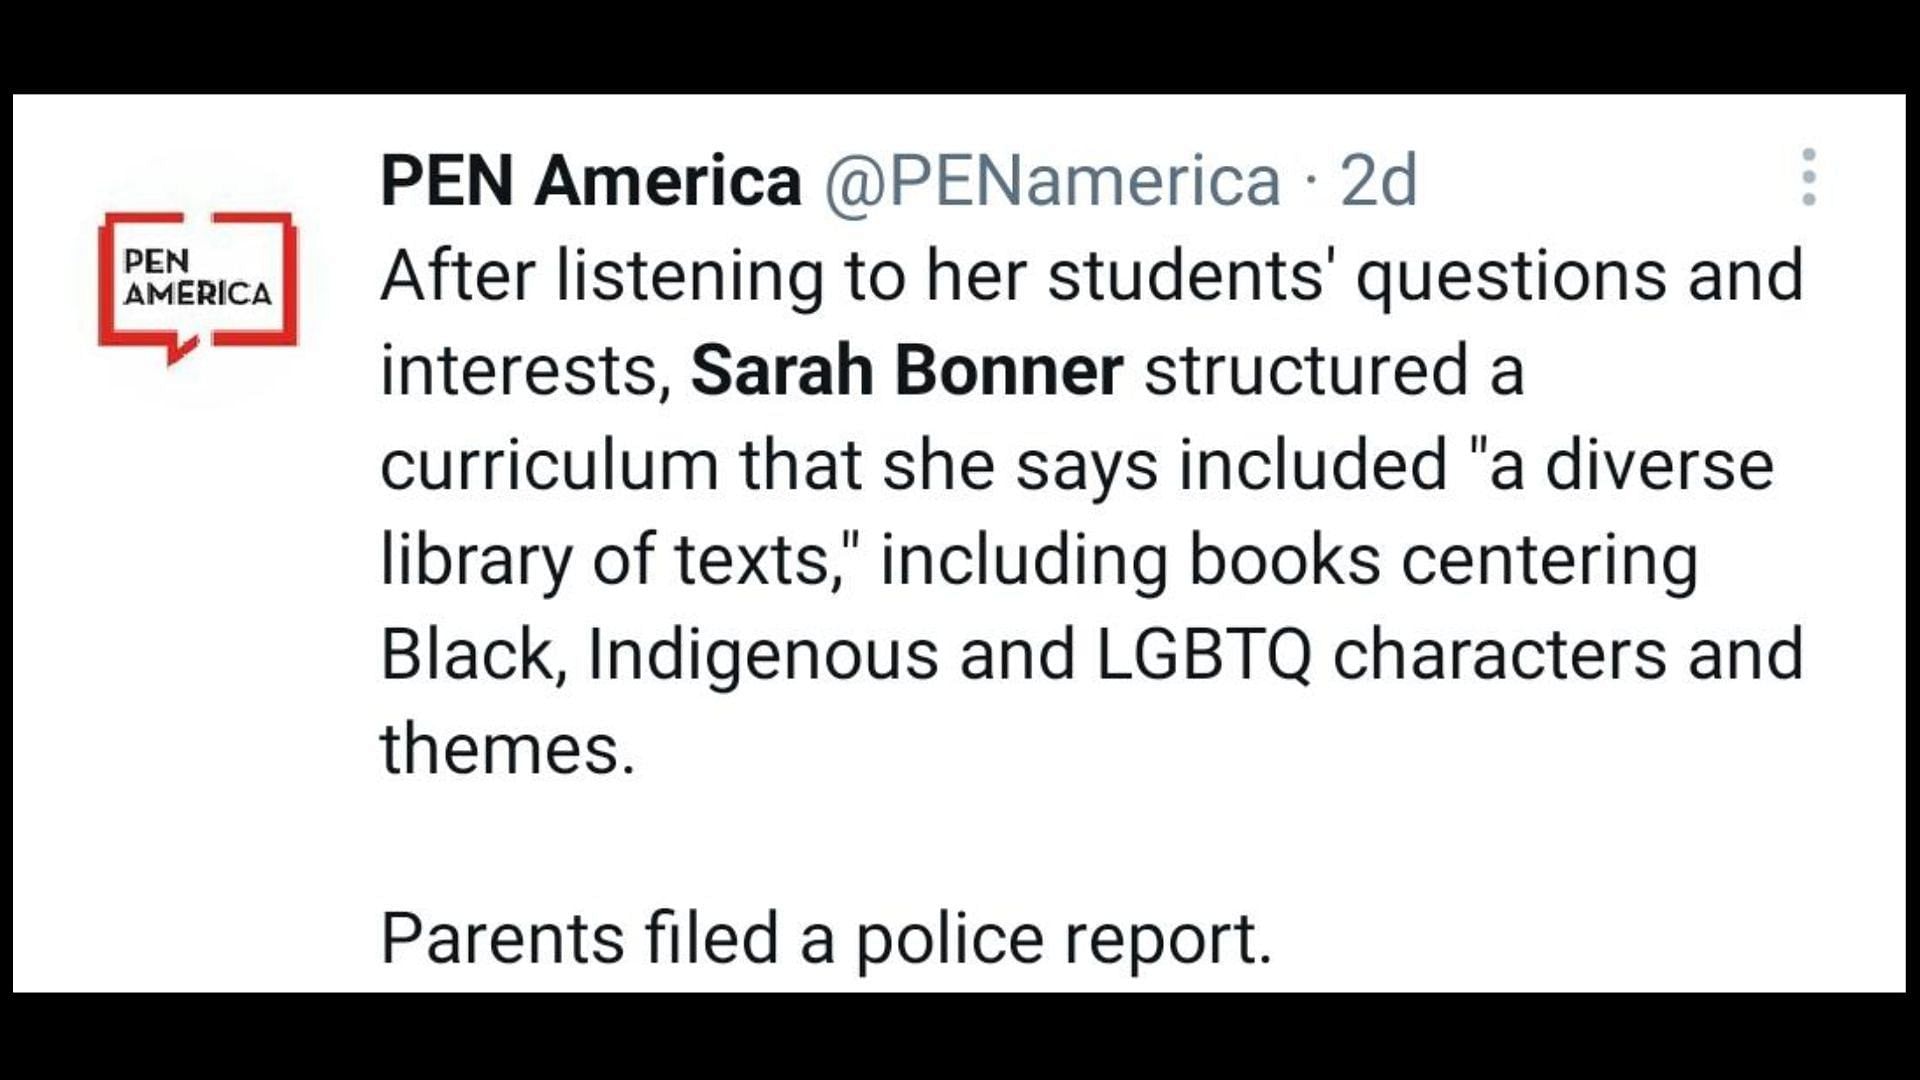 The veteran teacher has been suspended for offering LGBTQ-theme materials to young students, (Image via @PENamerica/Twitter)